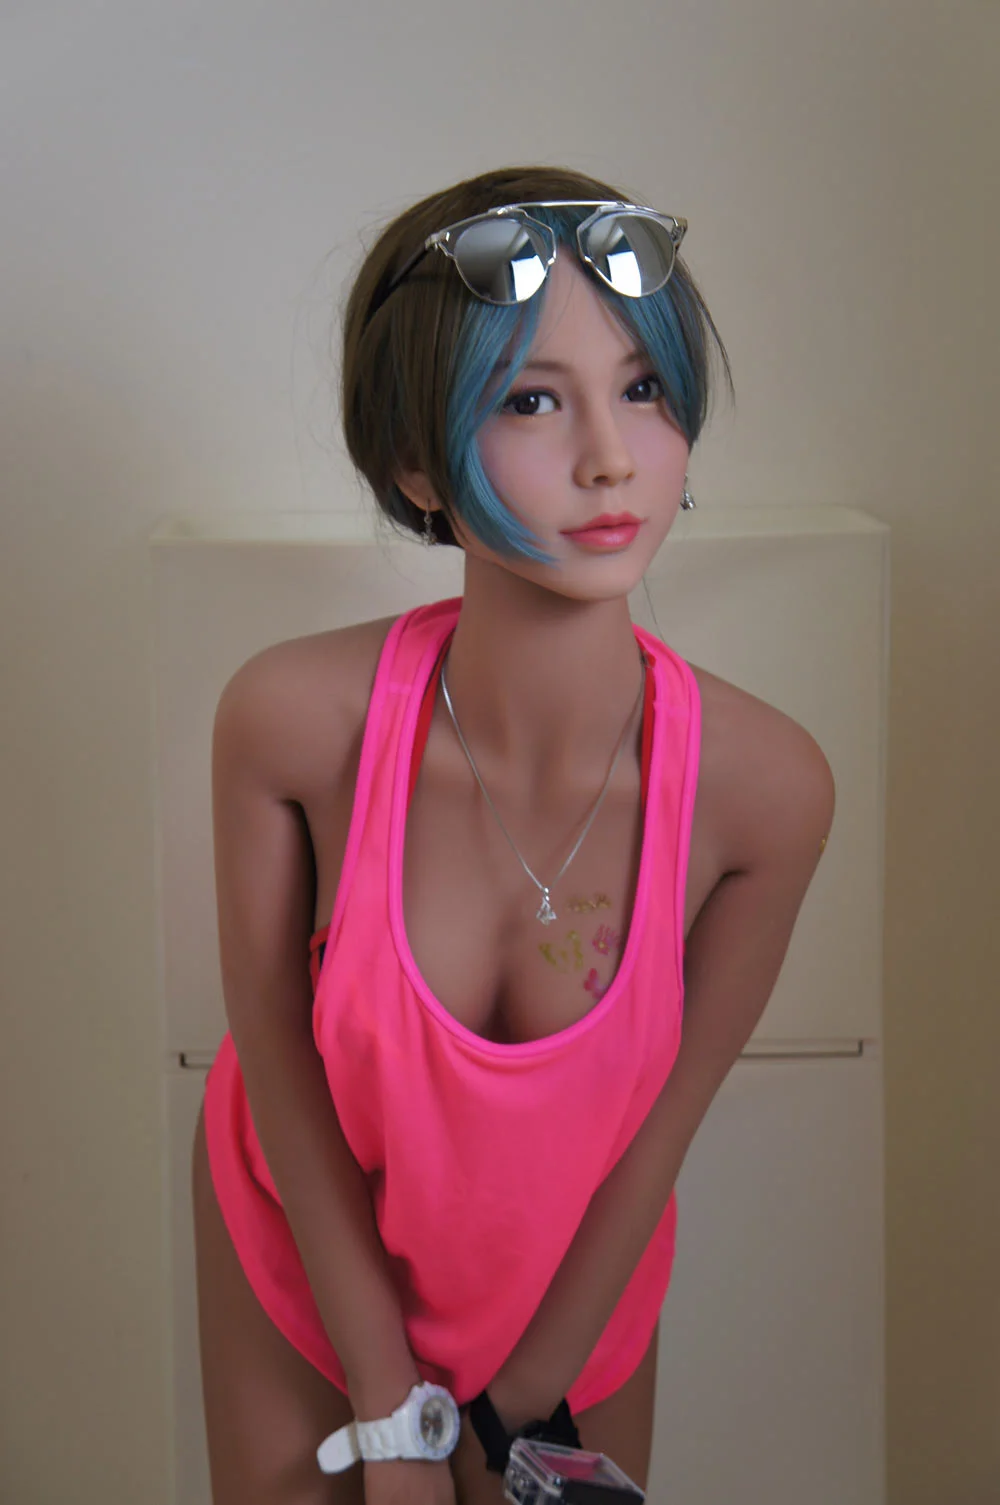 Sex doll wearing a white watch